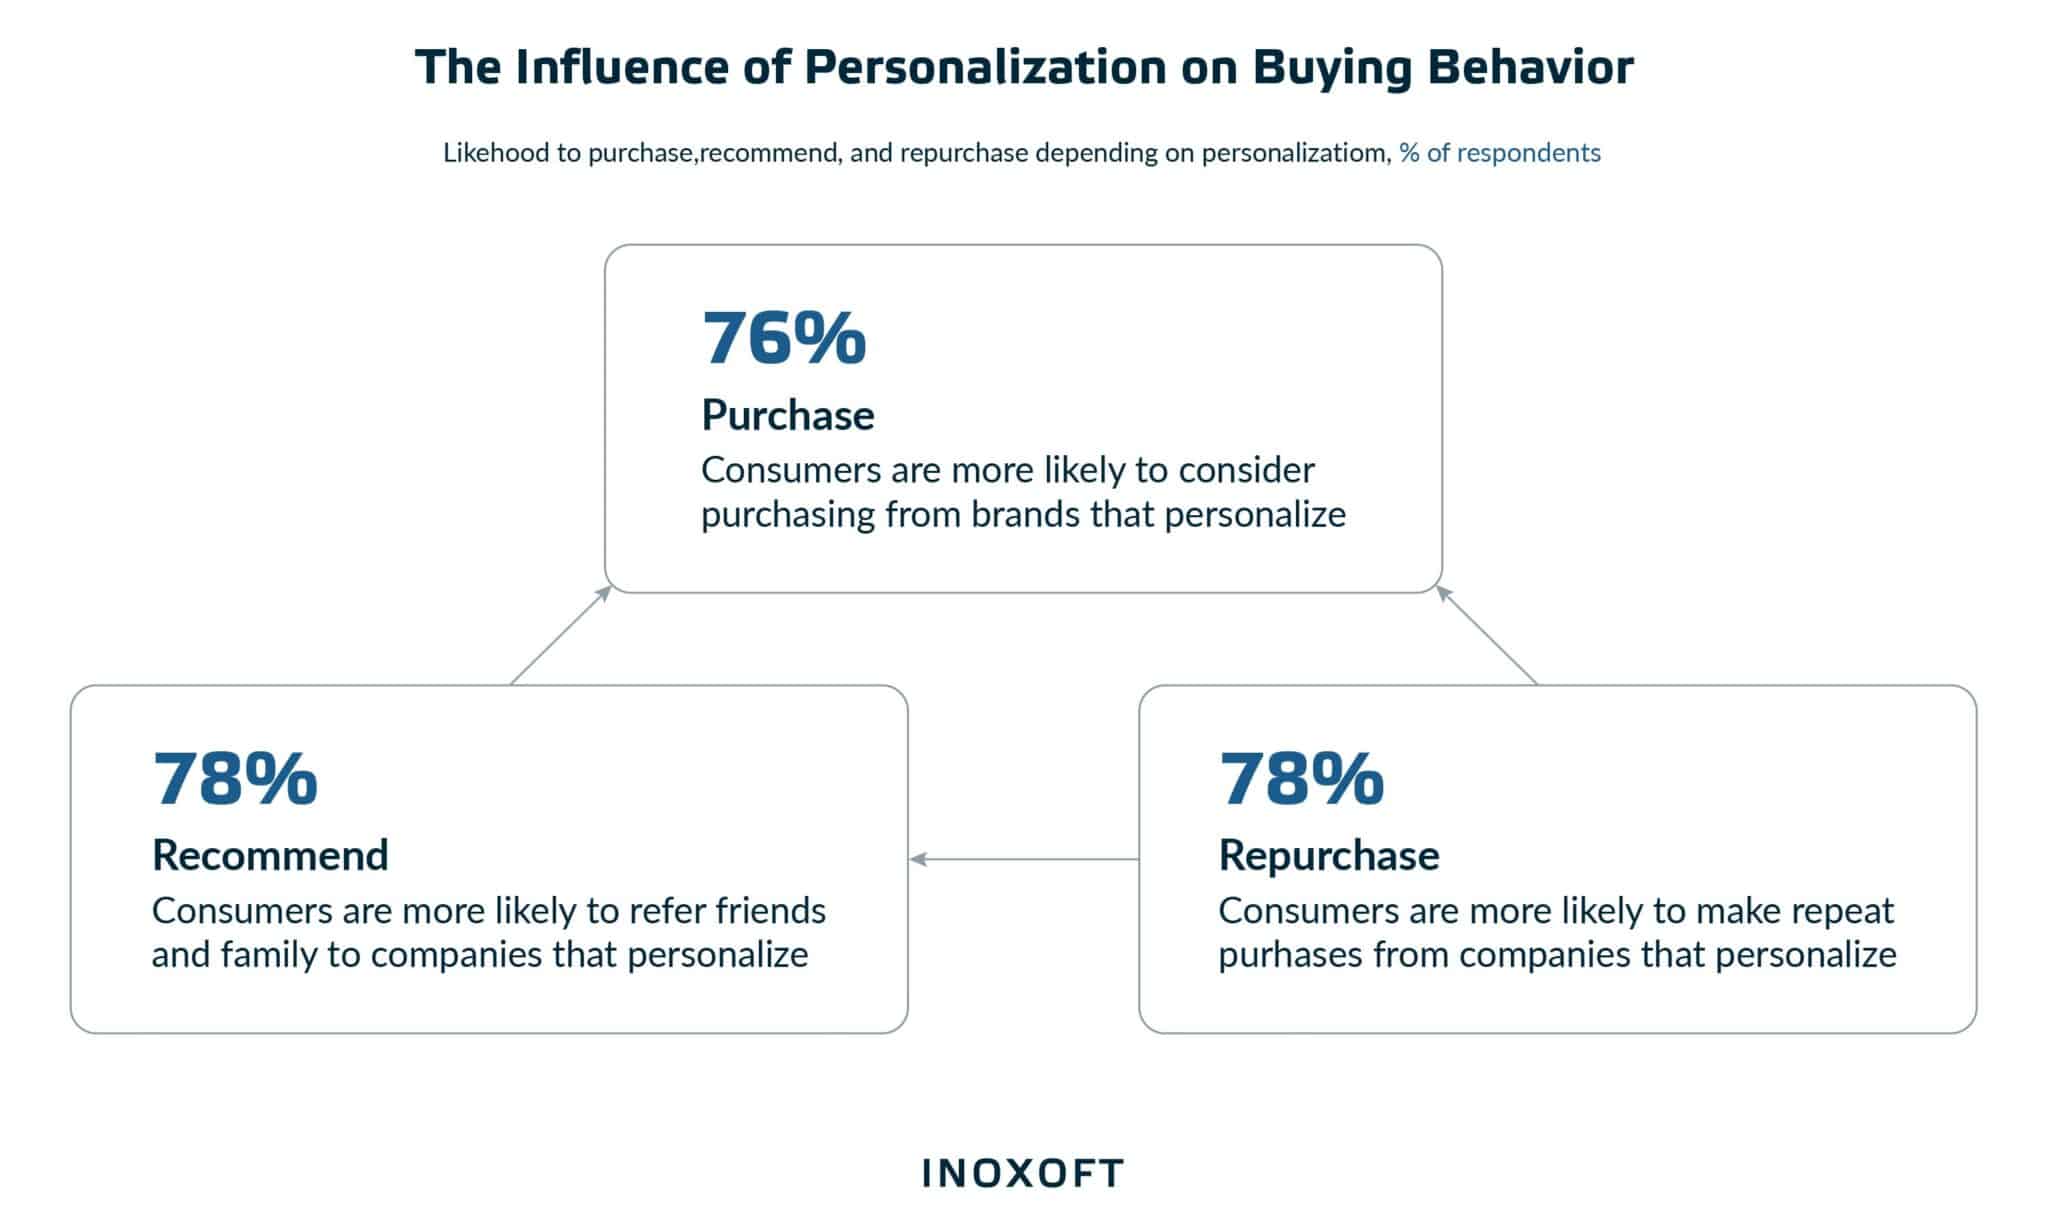 The influence of personalization on buying behavior